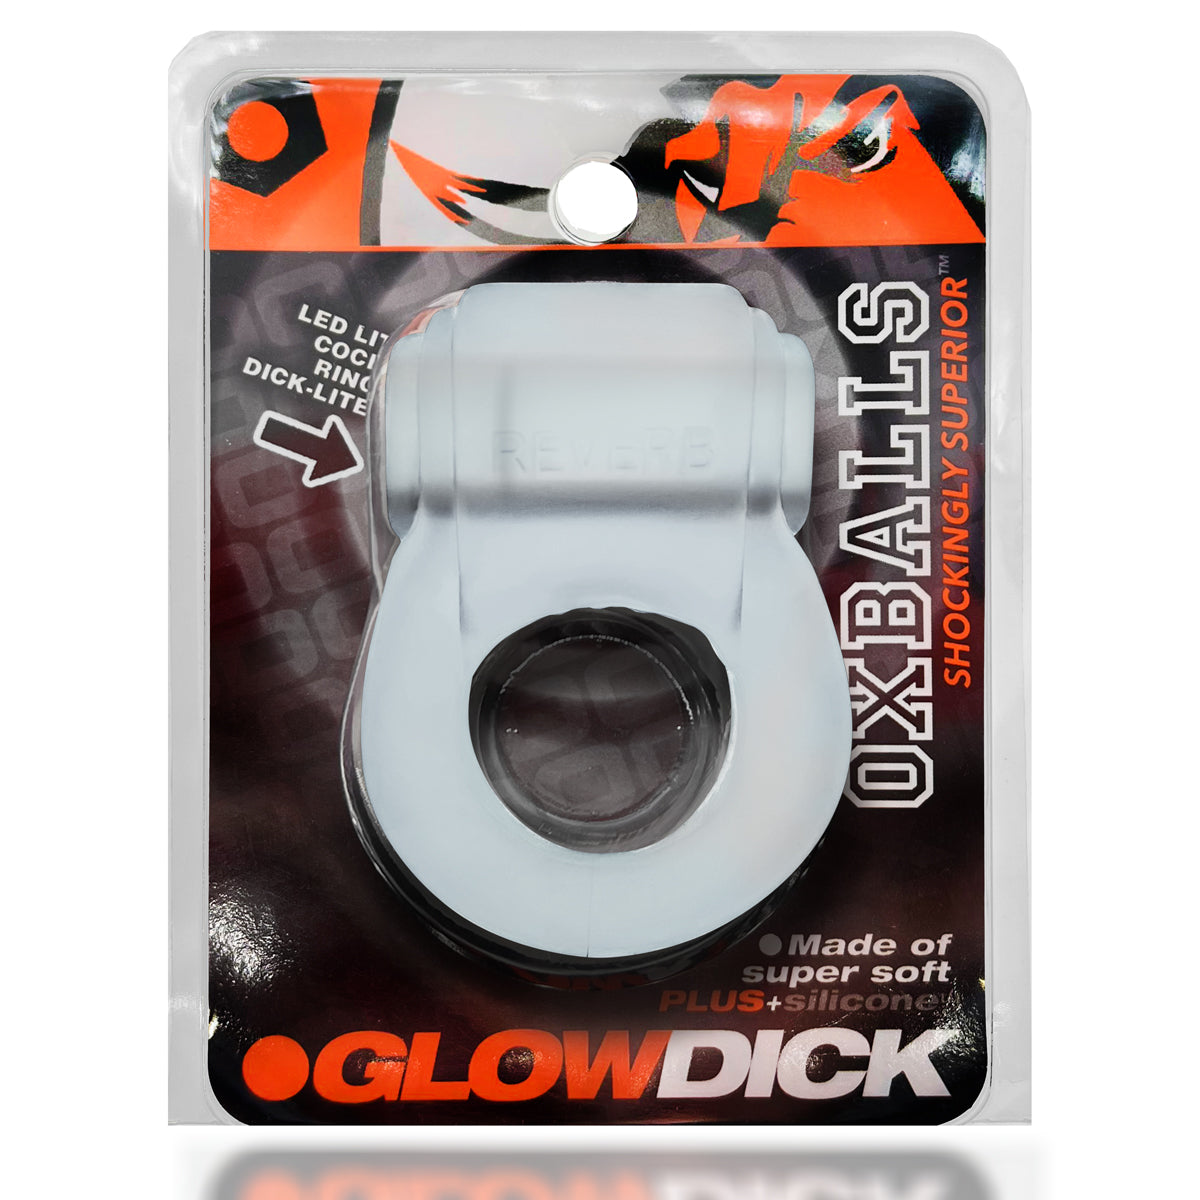 Oxballs GLOWDICK Cockring with LED